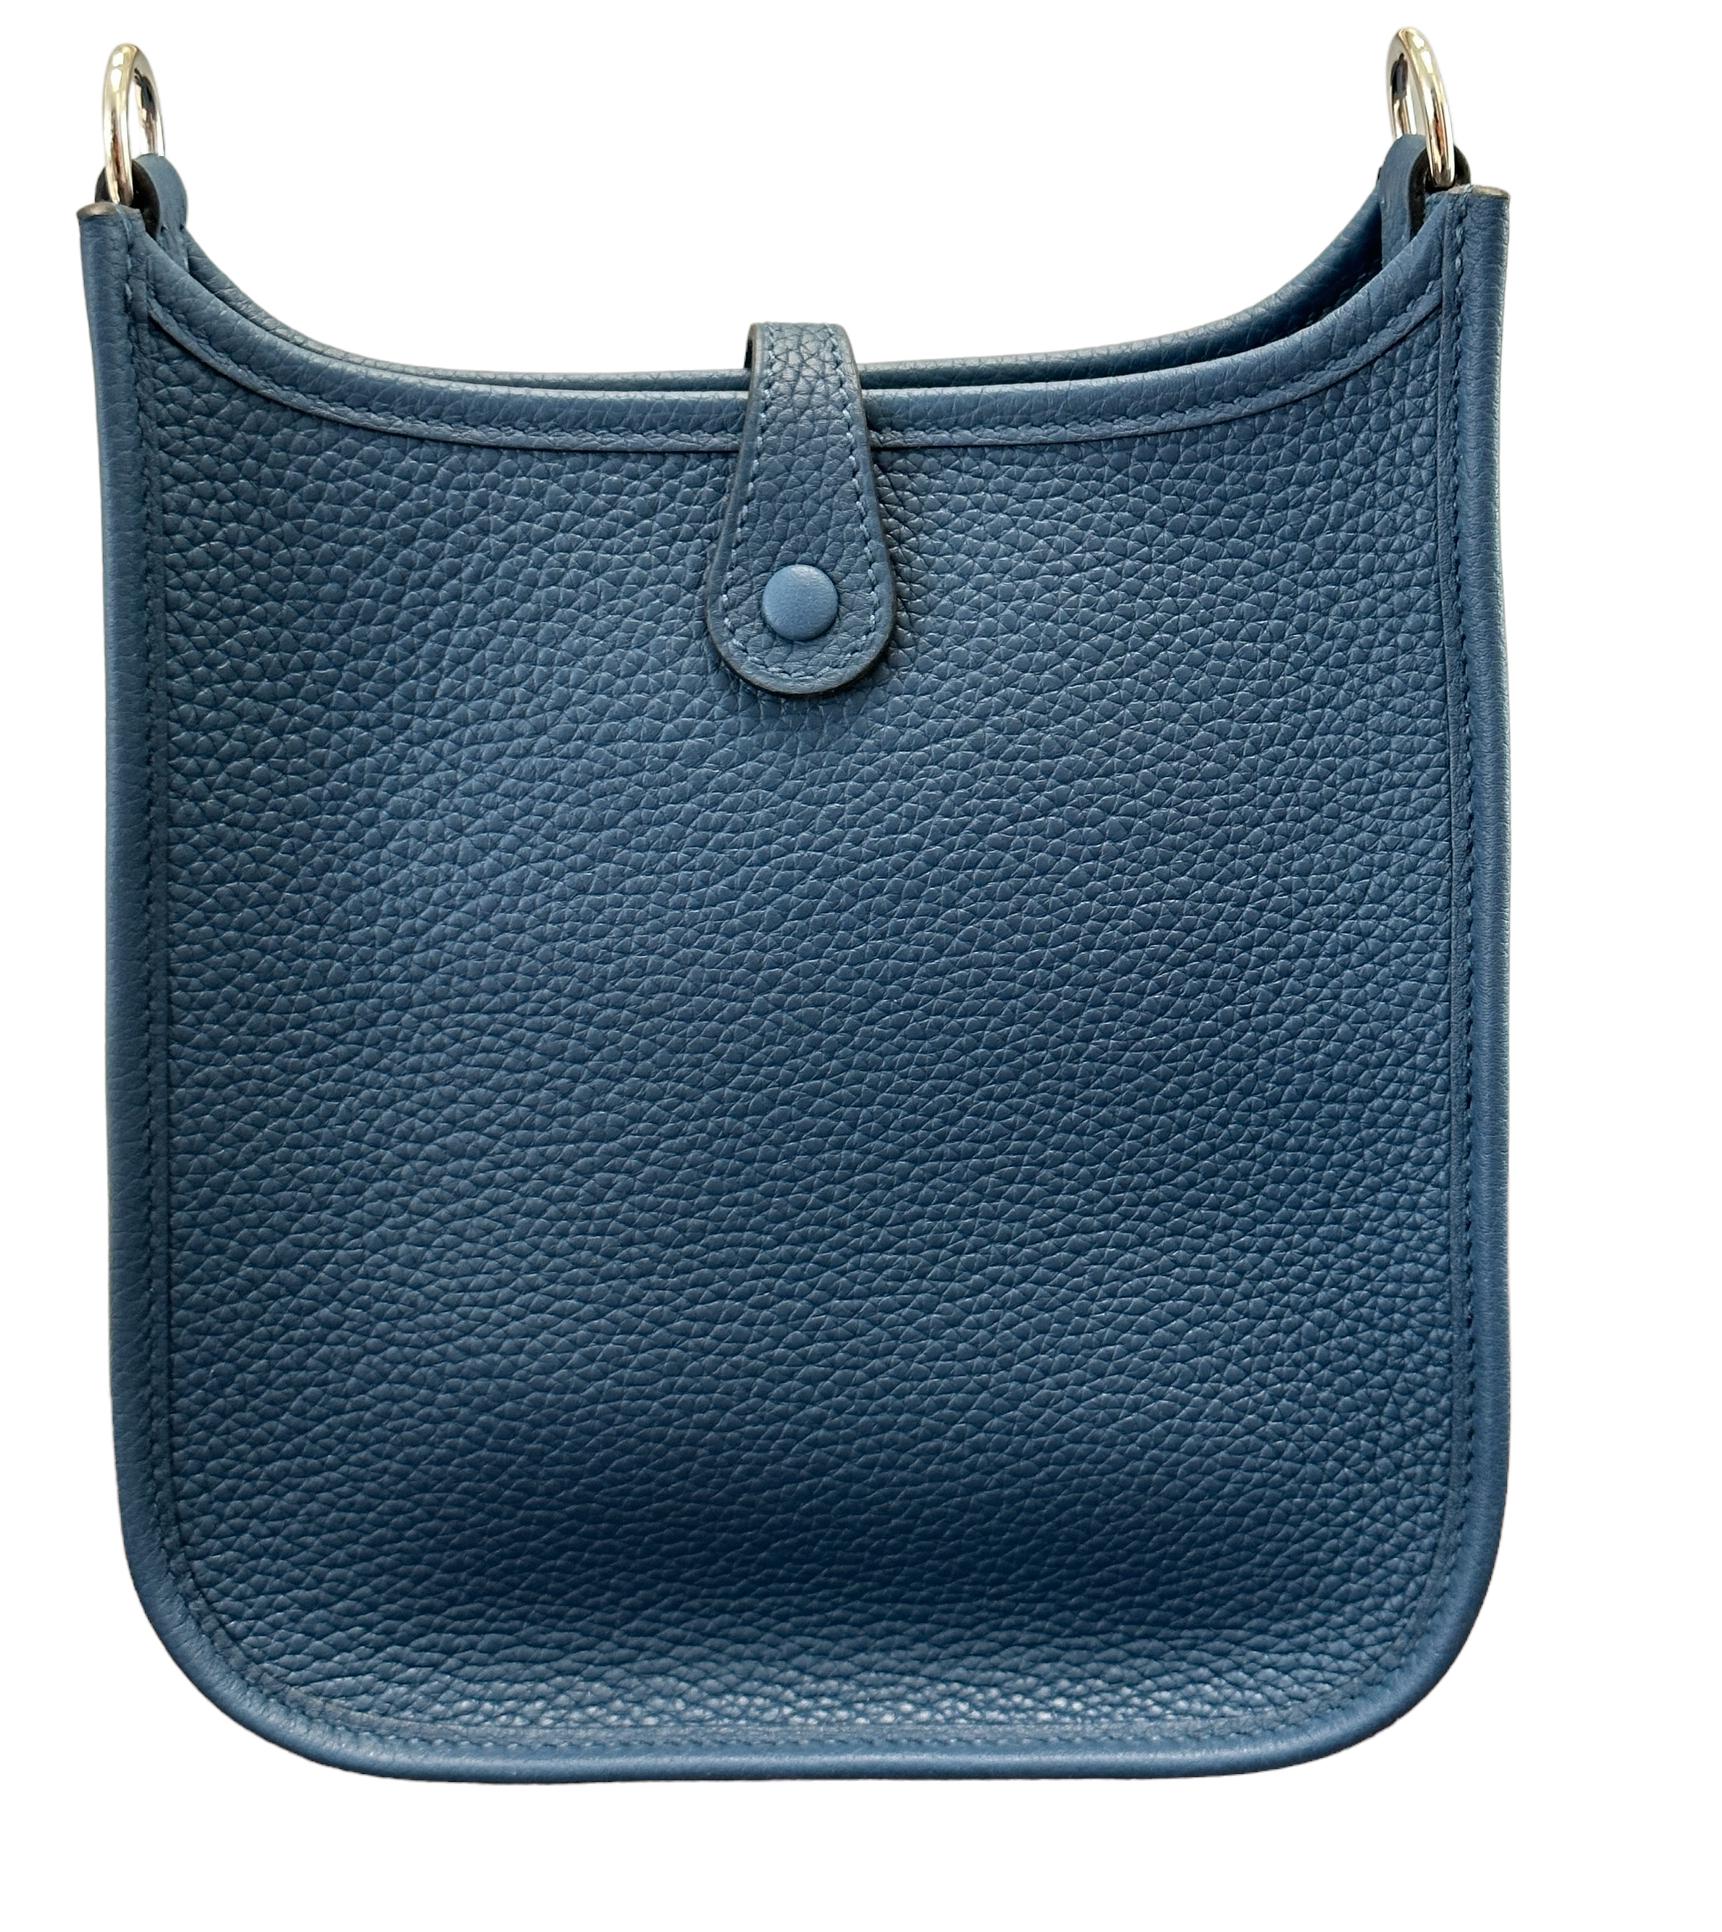 Hermes Evelyne Tpm 16
We have it in stock, ready, store fresh

This is the mini, the smallest size they make

Color is Deep Blue
Tonal stitching detail
Collection U
Natural  interior
Palladium plated hardware

Plastic on the hardware